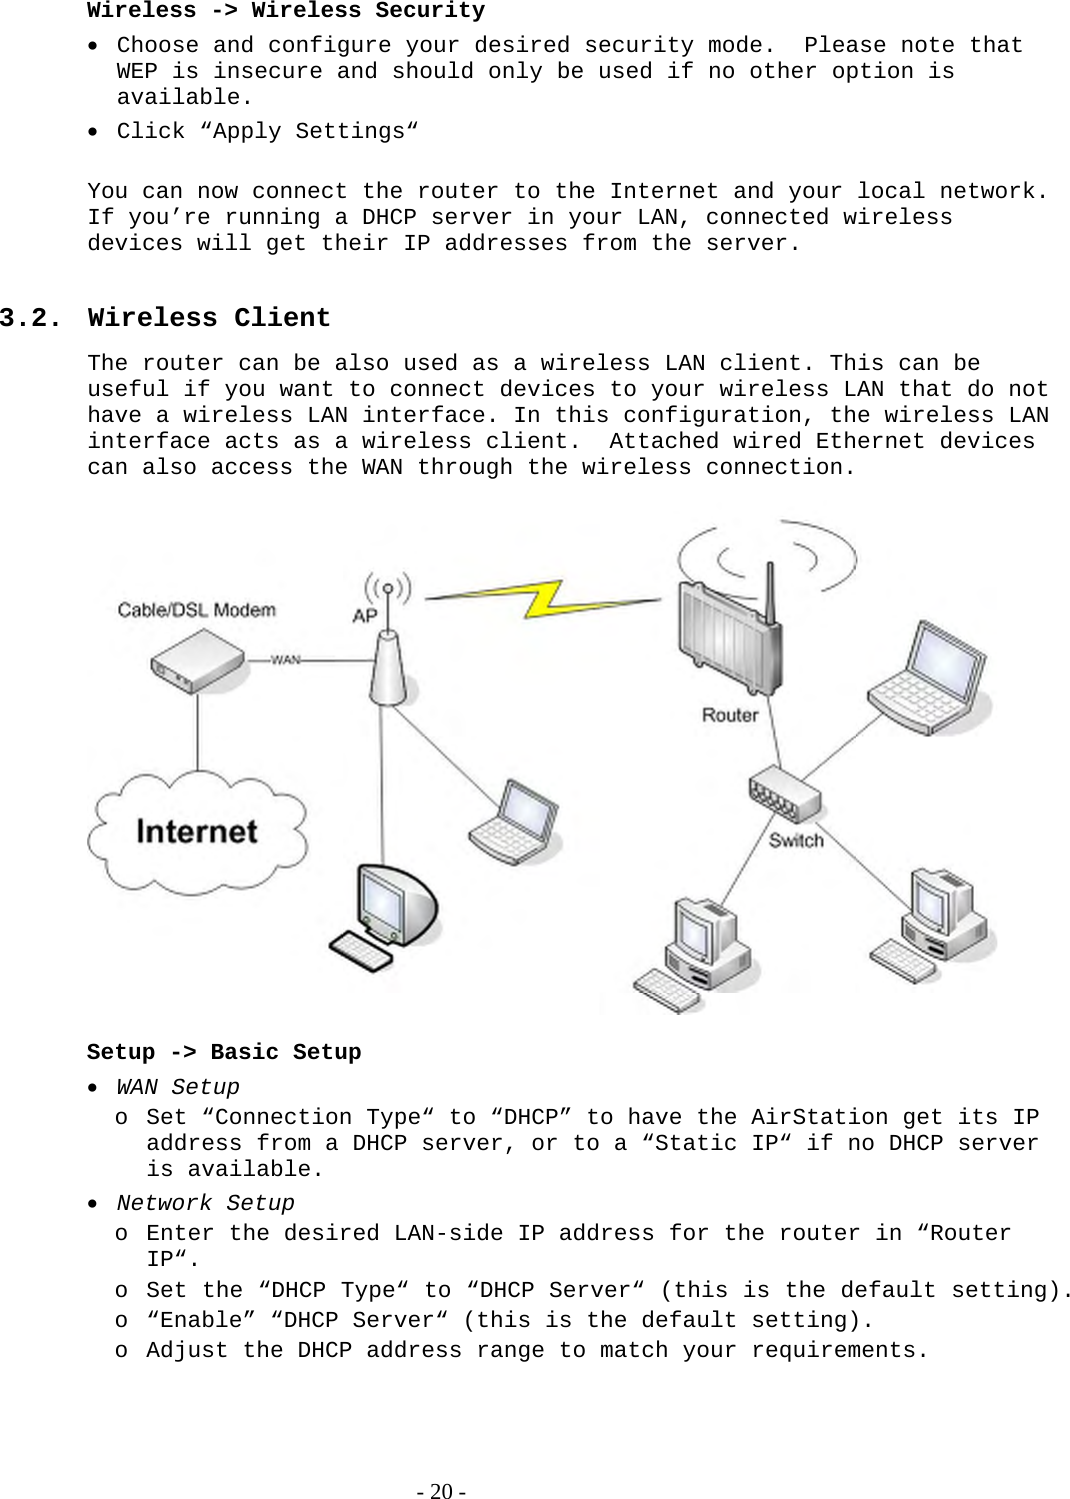  Wireless -&gt; Wireless Security  Choose and configure your desired security mode.  Please note that WEP is insecure and should only be used if no other option is available.  Click “Apply Settings“  You can now connect the router to the Internet and your local network. If you’re running a DHCP server in your LAN, connected wireless devices will get their IP addresses from the server.  3.2. Wireless Client The router can be also used as a wireless LAN client. This can be useful if you want to connect devices to your wireless LAN that do not have a wireless LAN interface. In this configuration, the wireless LAN interface acts as a wireless client.  Attached wired Ethernet devices can also access the WAN through the wireless connection.    Setup -&gt; Basic Setup  WAN Setup o Set “Connection Type“ to “DHCP” to have the AirStation get its IP address from a DHCP server, or to a “Static IP“ if no DHCP server is available.  Network Setup o Enter the desired LAN-side IP address for the router in “Router IP“.  o Set the “DHCP Type“ to “DHCP Server“ (this is the default setting). o “Enable” “DHCP Server“ (this is the default setting). o Adjust the DHCP address range to match your requirements.   - 20 - 